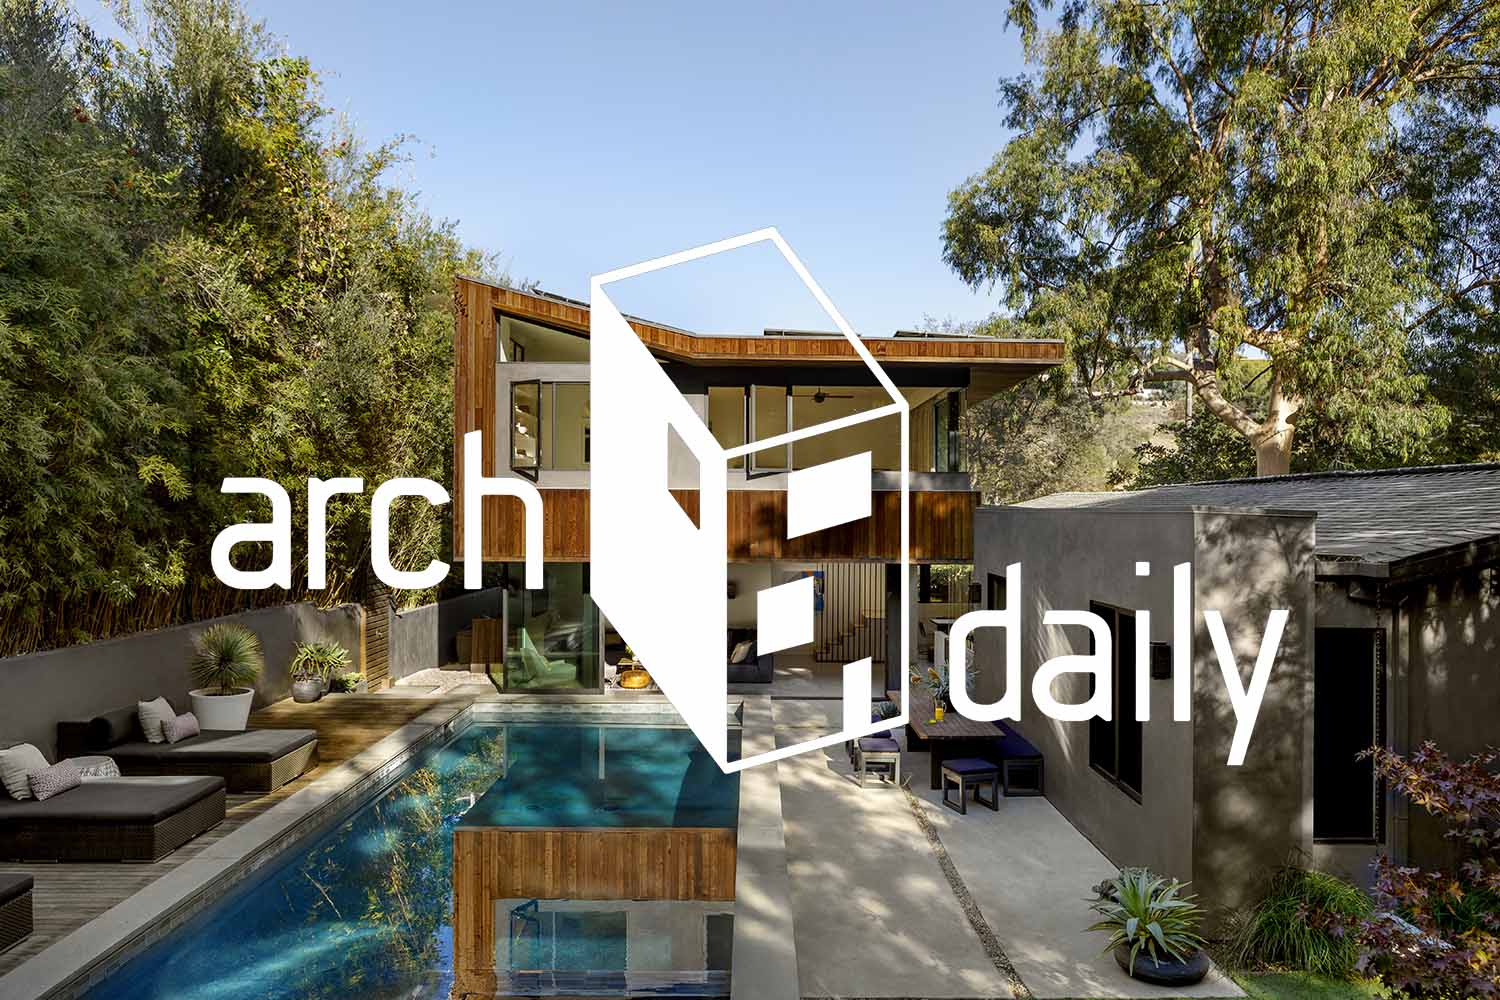 Assembledge, ArchDaily, Wonderland Park Residence, Los Angeles Architecture